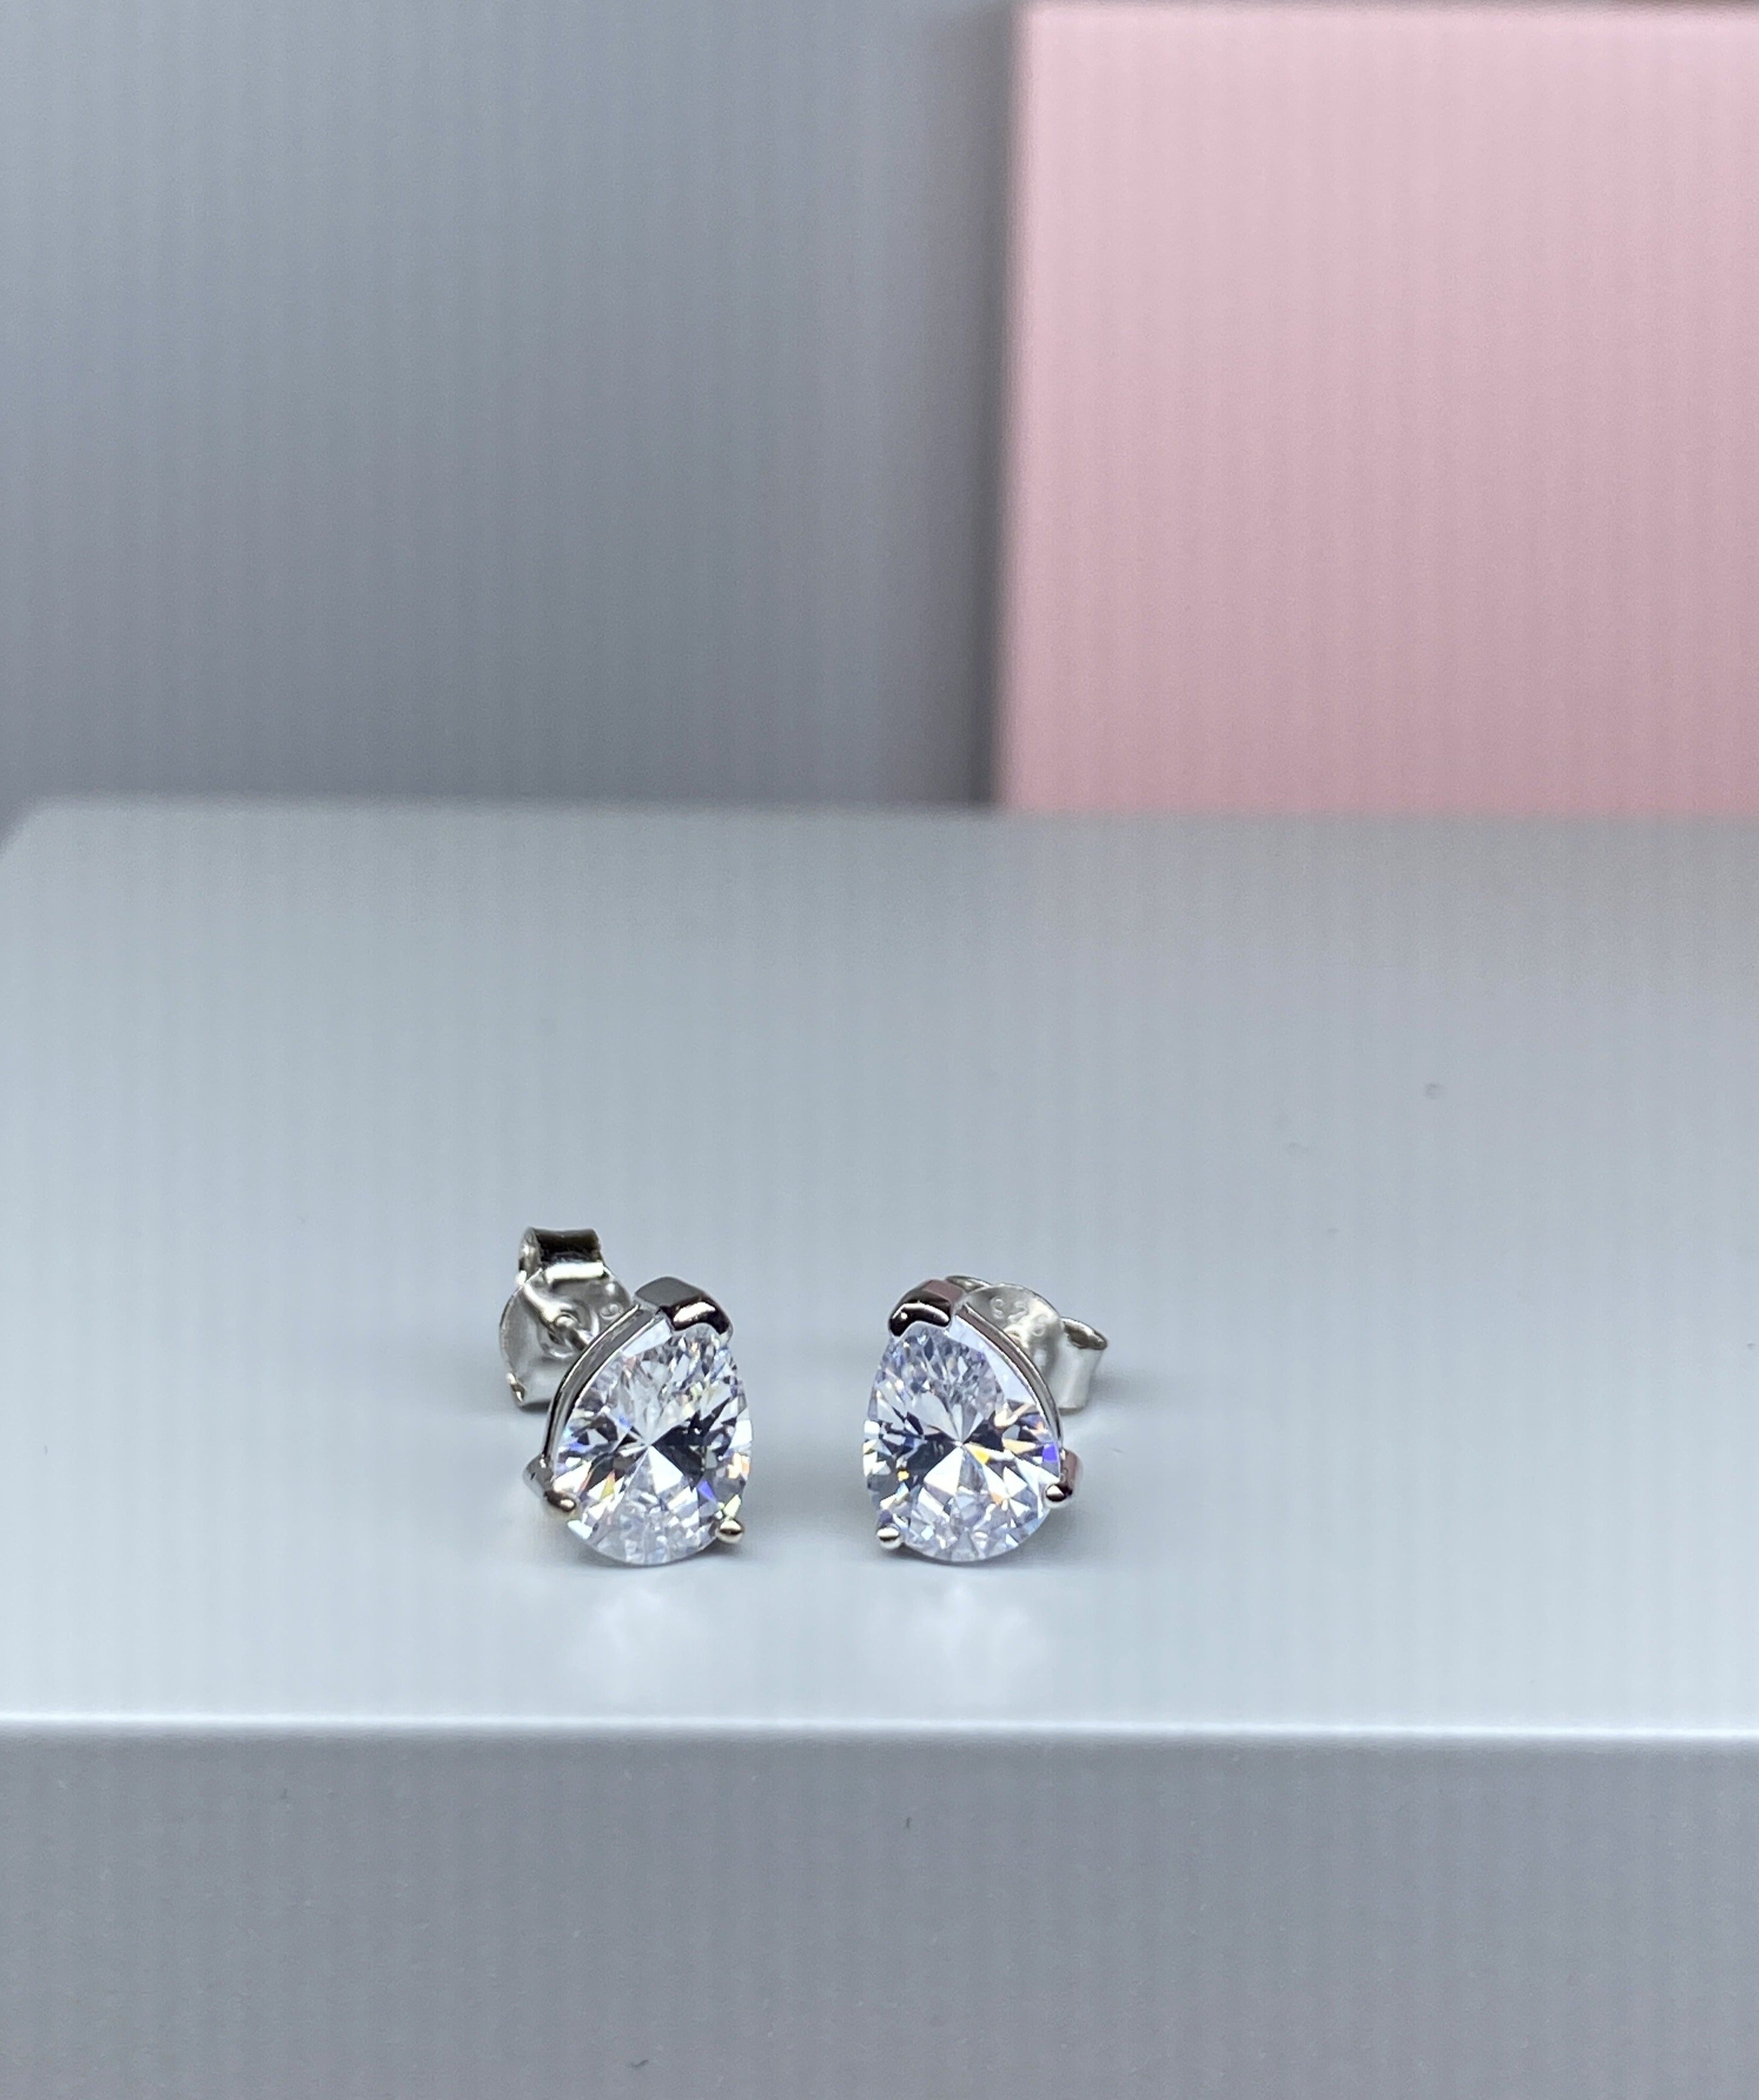 Sterling Silver Pear Shape CZ Earrings - 8.5mm - Hallmark Jewellers Formby & The Jewellers Bench Widnes